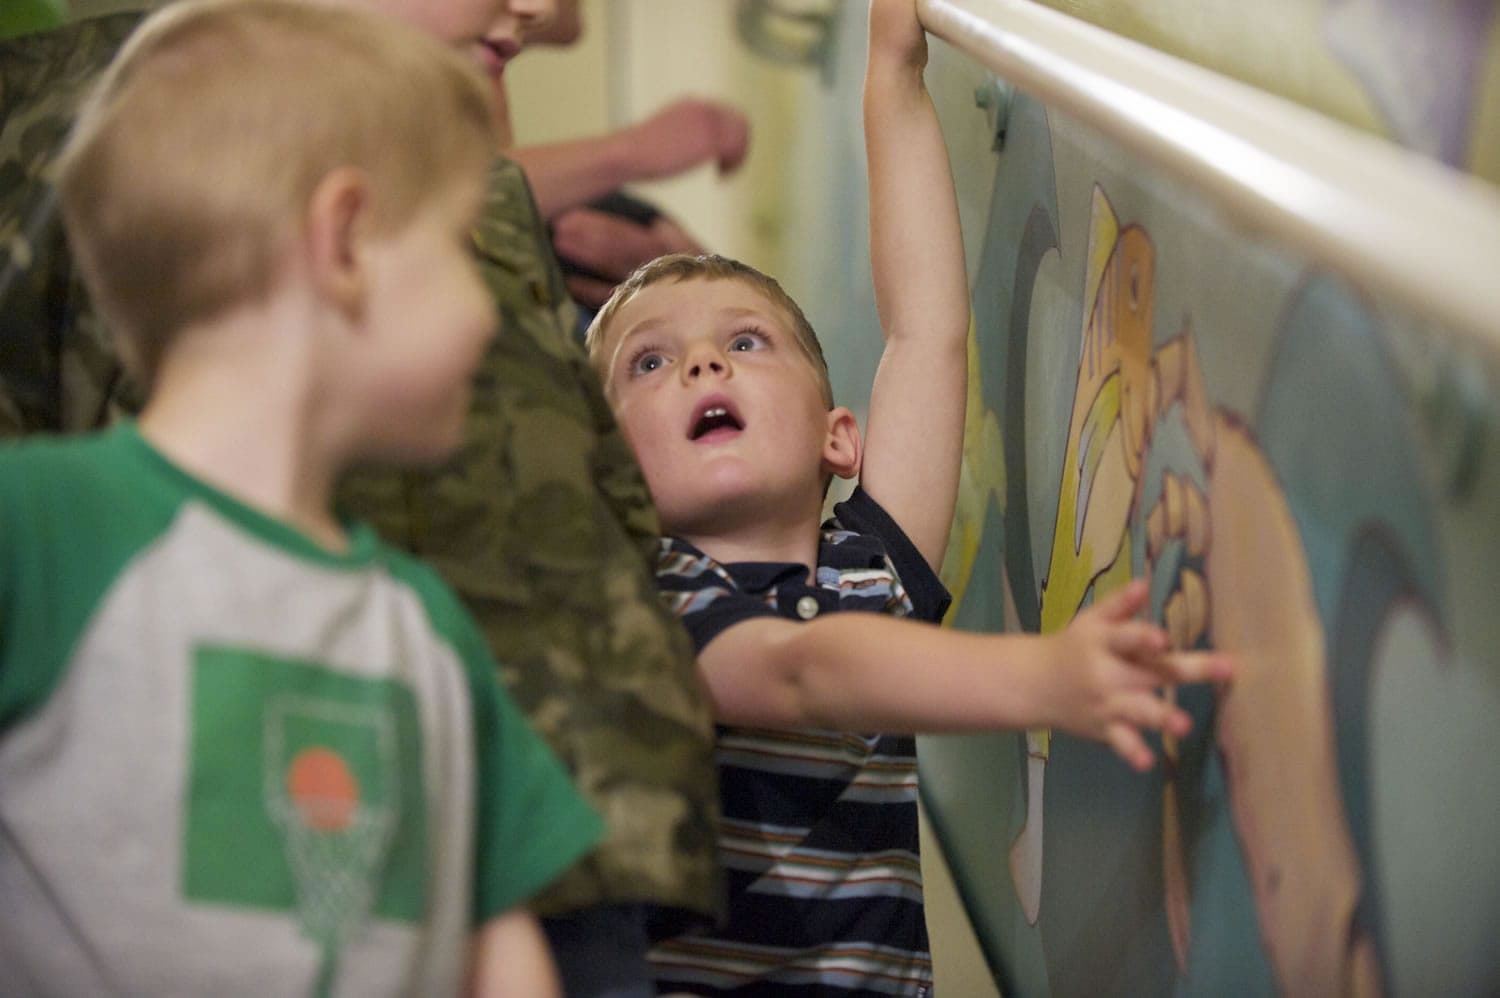 Logan Volk, 4, gets a hands-on look July 20 as Legacy Salmon Creek Hospital unveils a new mural, created by local artist Rebecca Anstine, in a stairwell used for pediatric rehab and physical therapy.